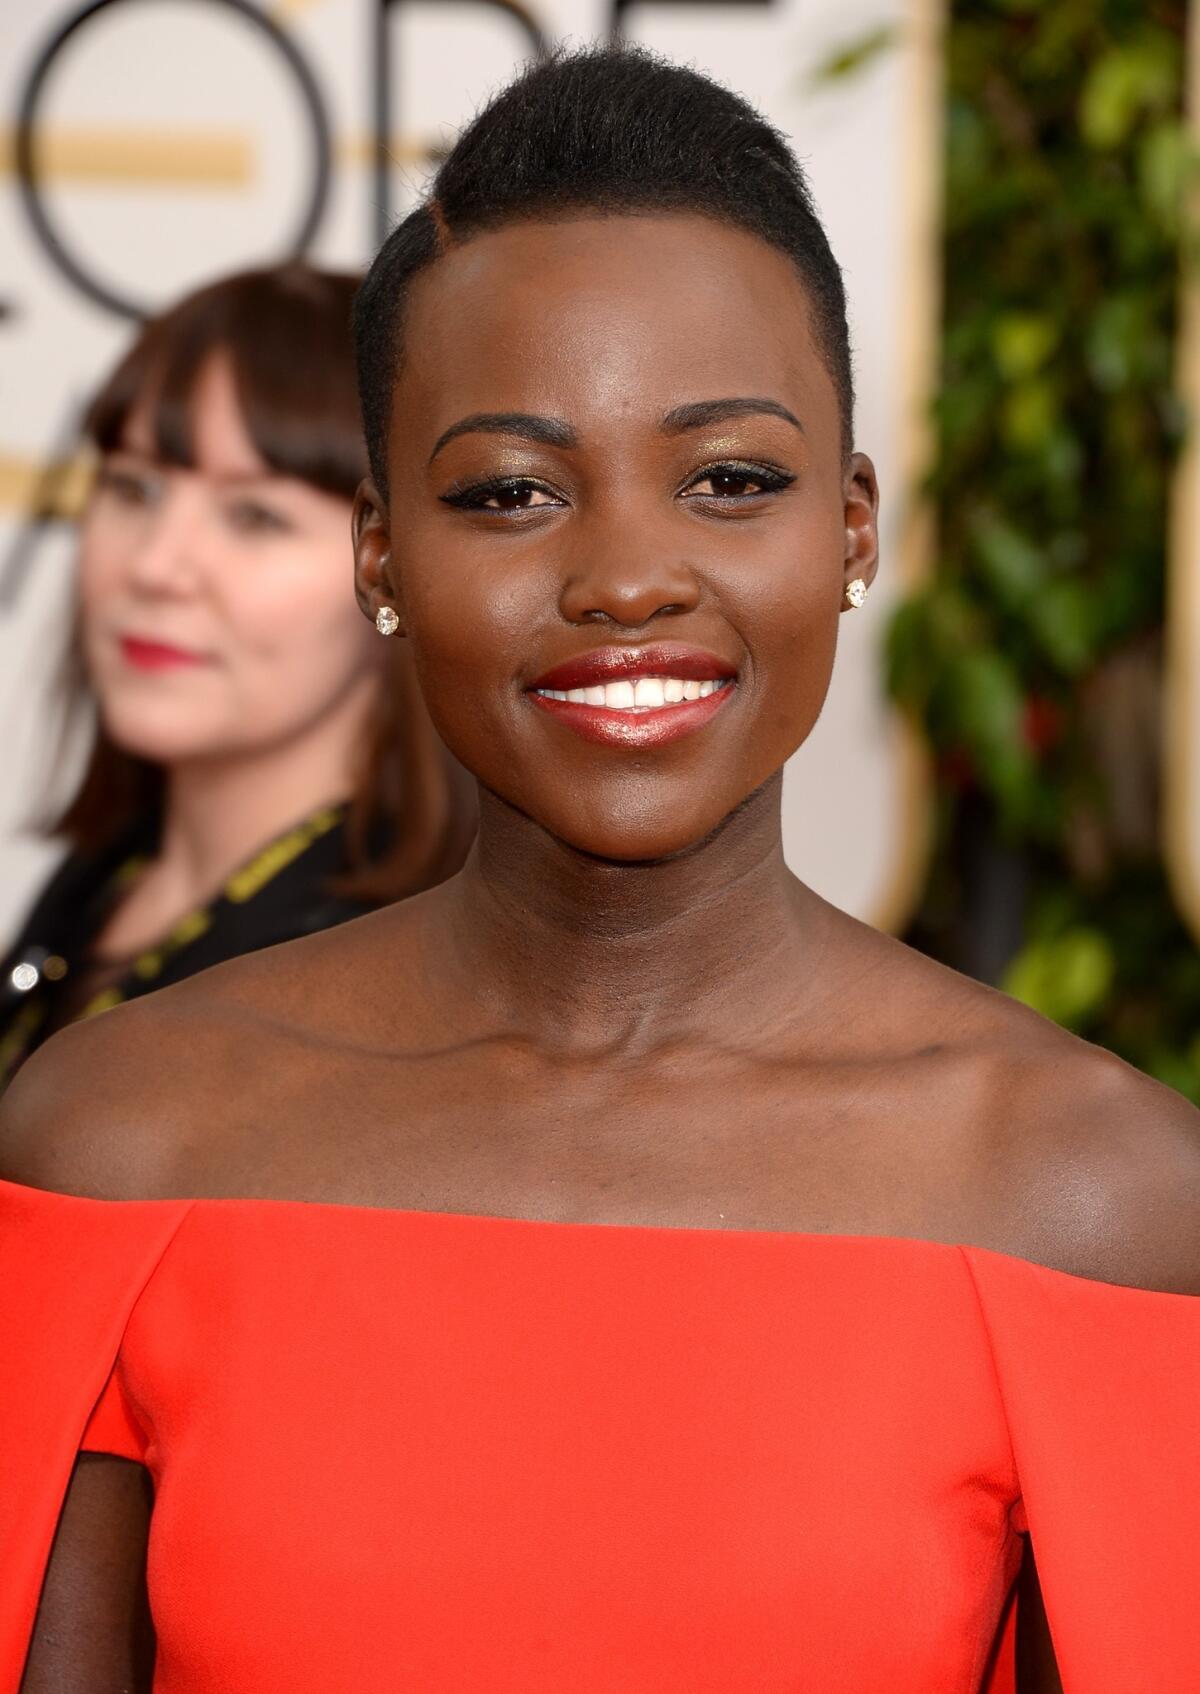 Actress Lupita Nyong'o's sleek hairdo was a perfect match to her dramatic red Ralph Lauren dress.